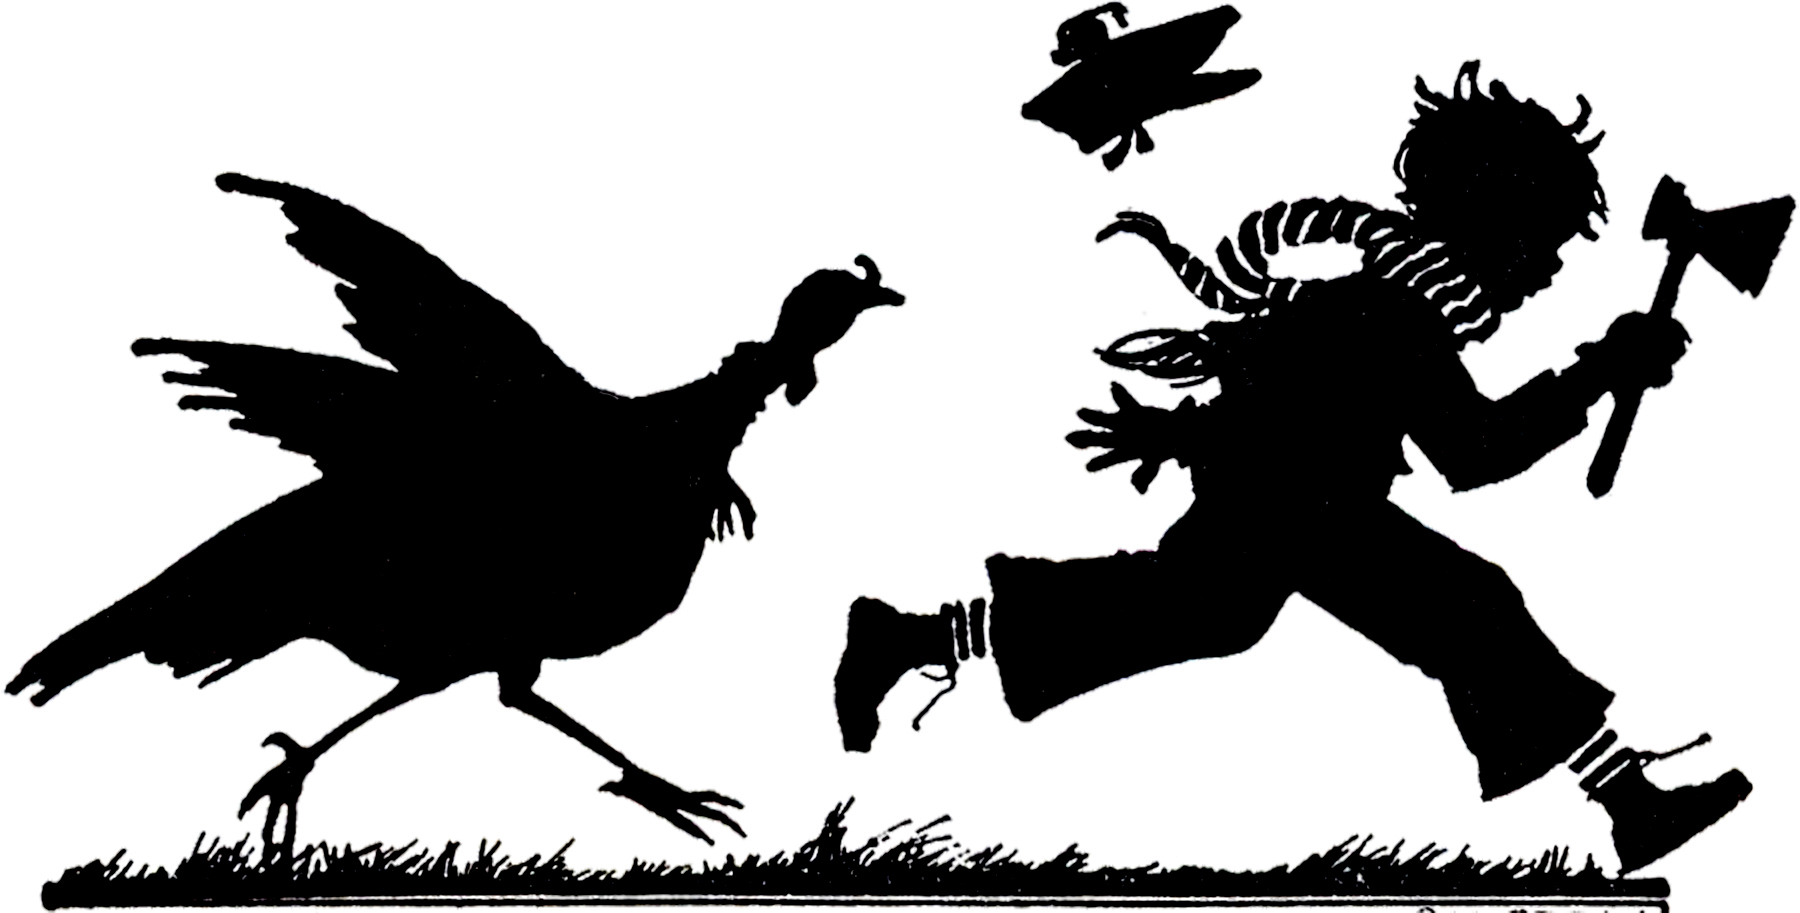 Thanksgiving Turkey Gets Revenge - Cute Silhouette! - The Graphics Fairy